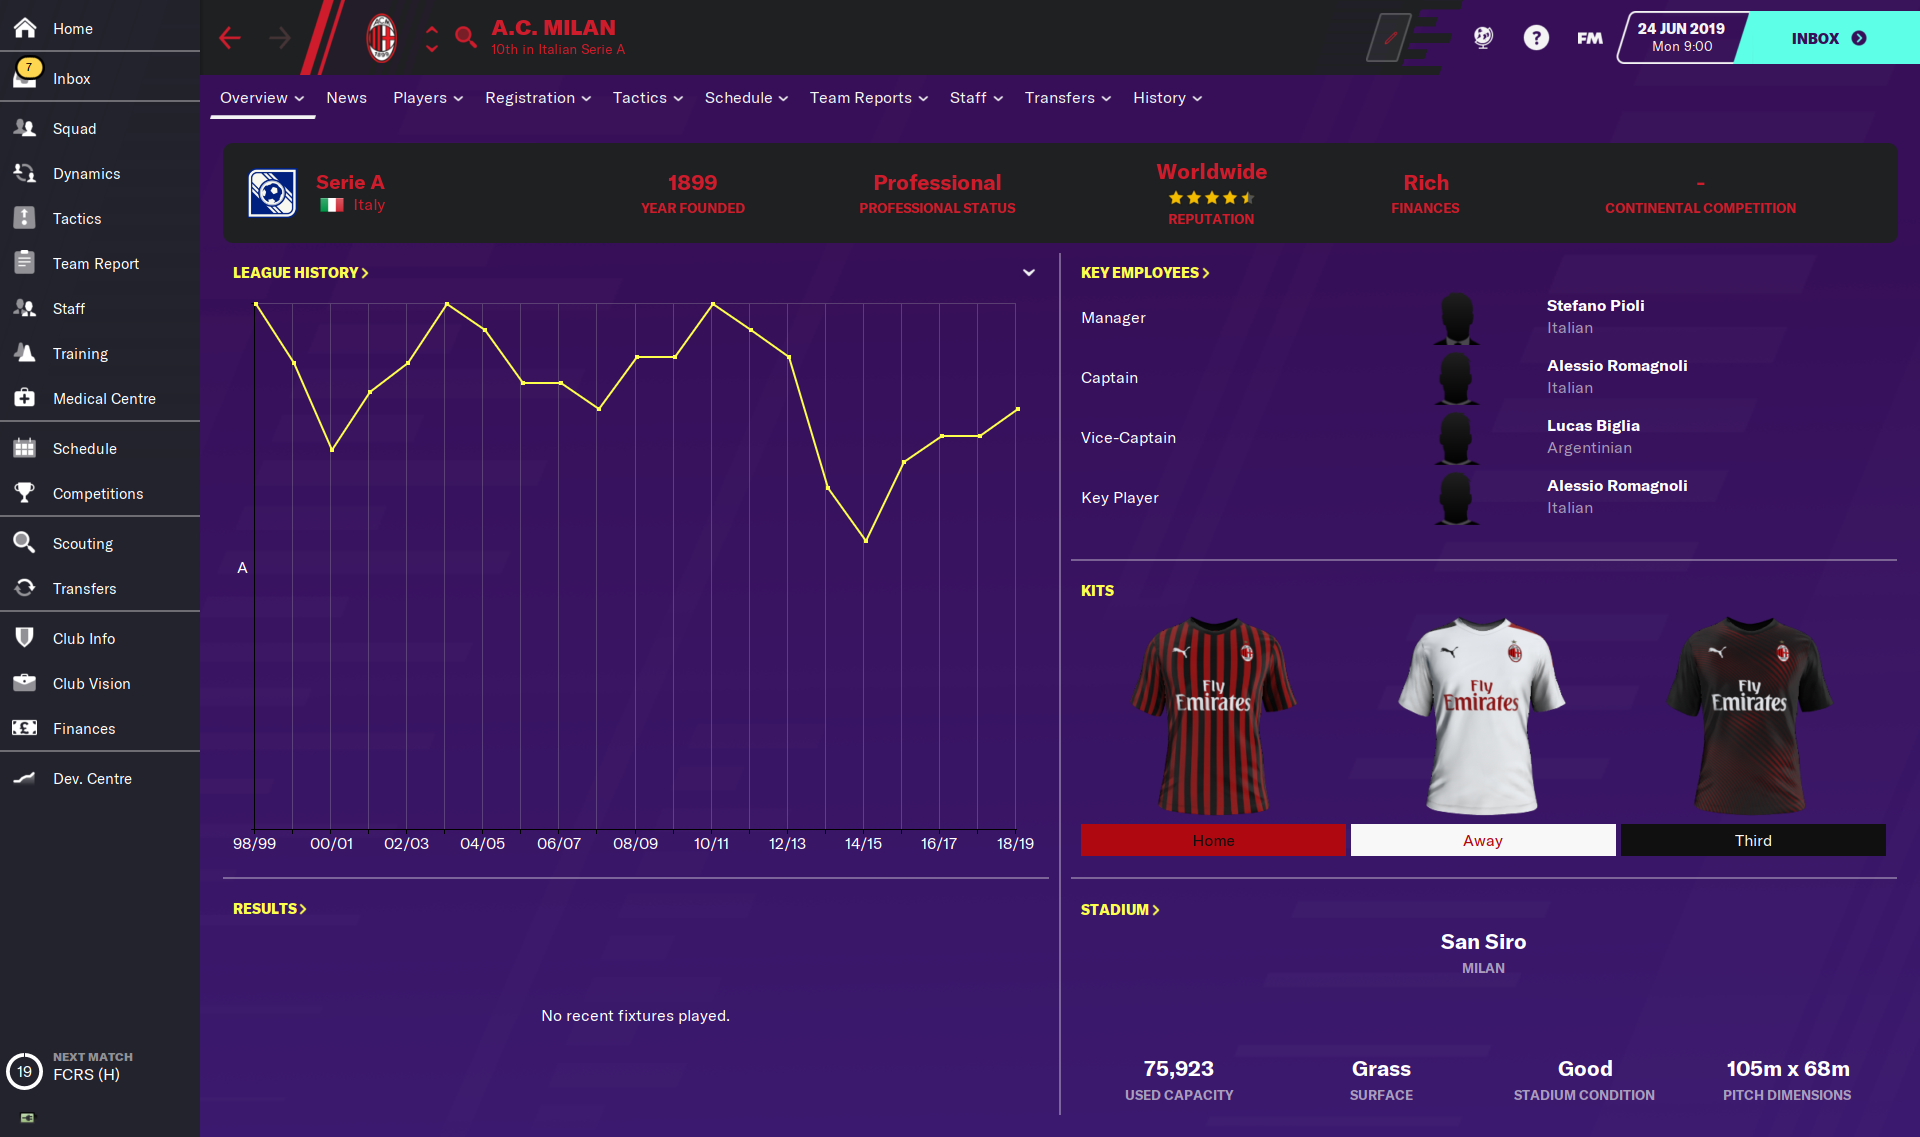 A.C. Milan's profile in Football Manager 2020